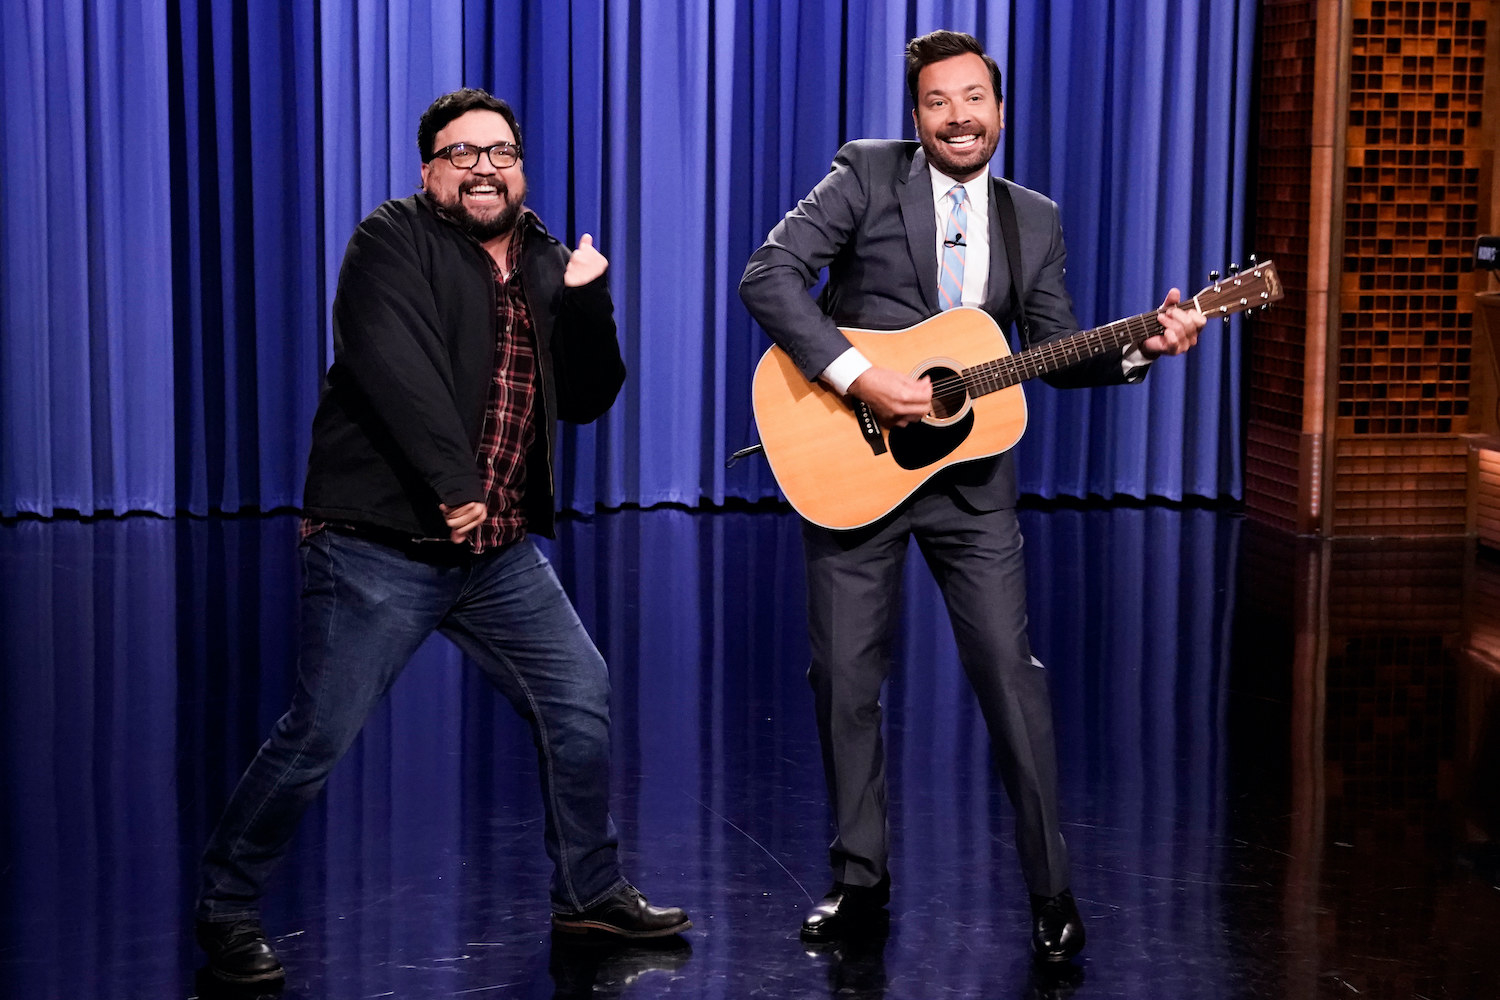 Horatio Sanz and Jimmy Fallon dance together on stage in front of a curtain